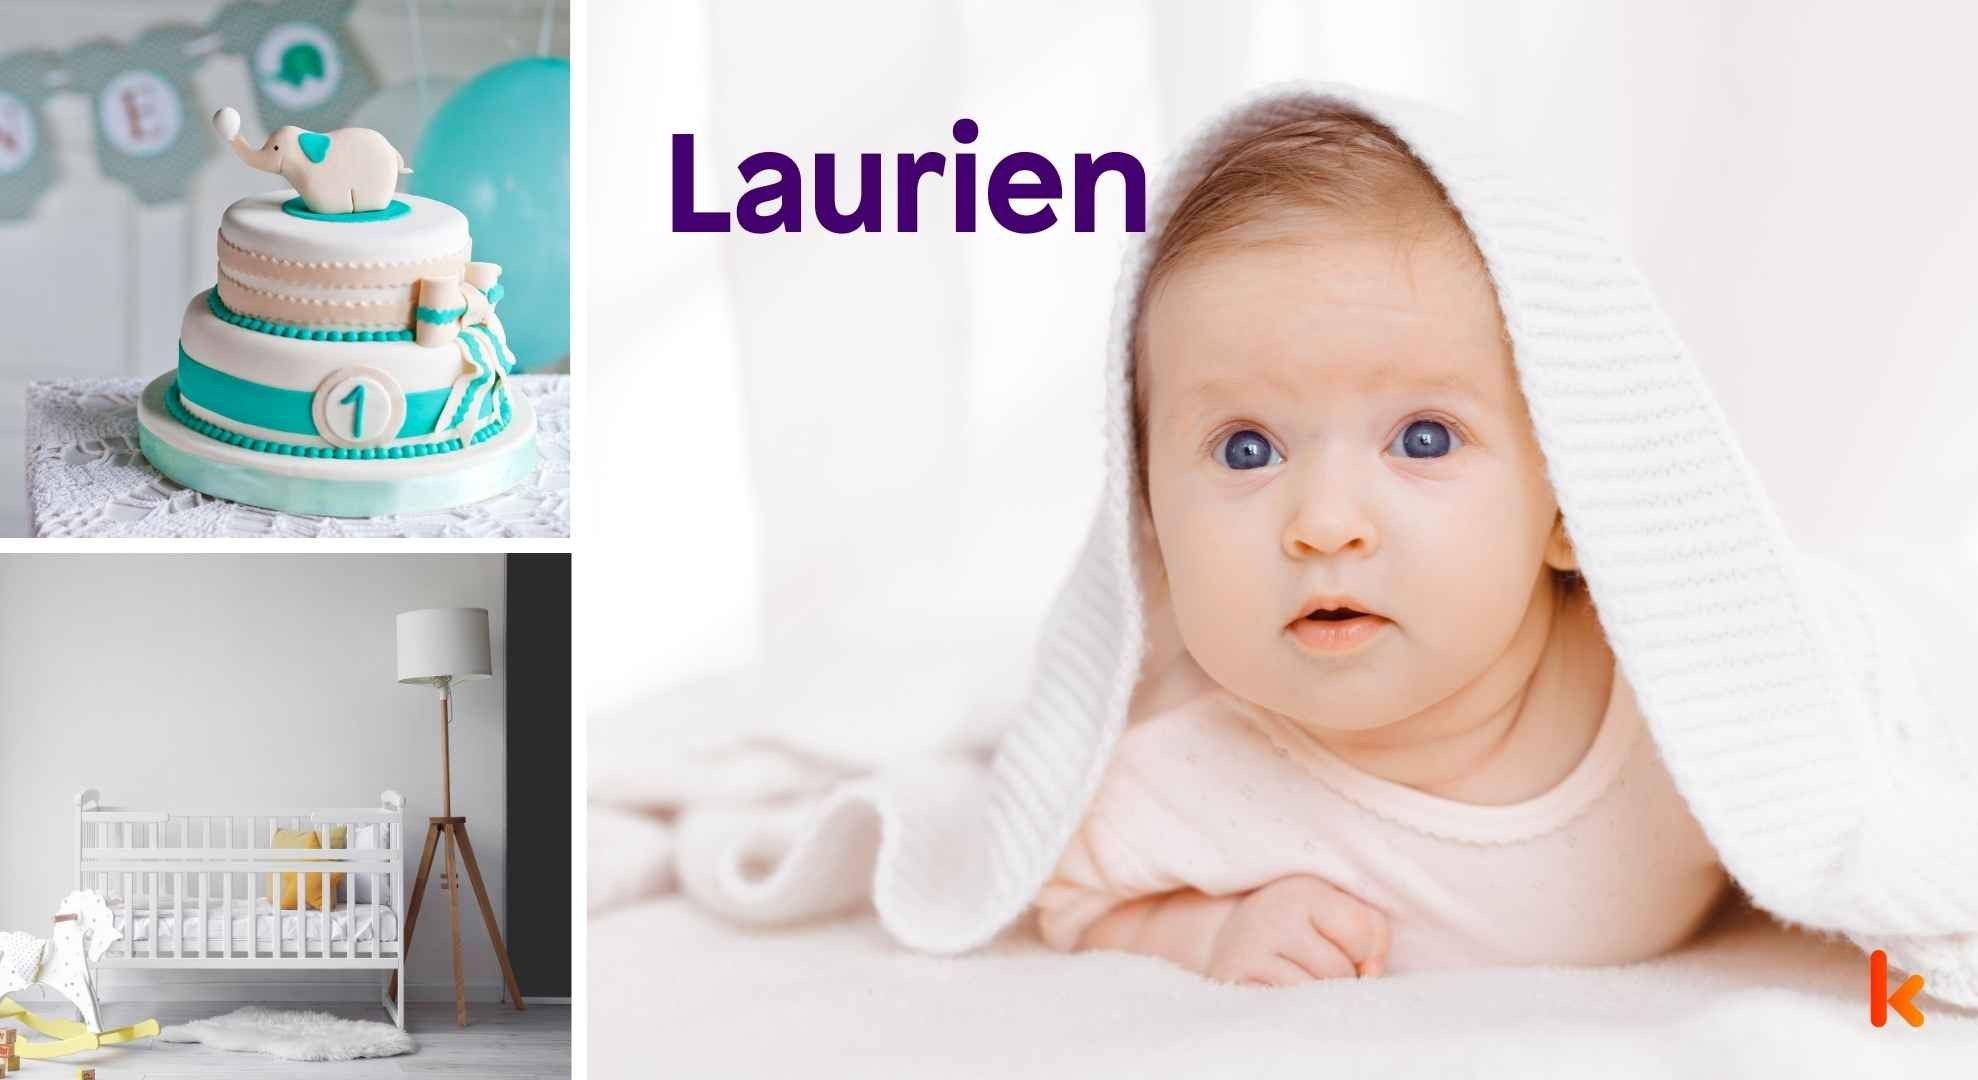 Meaning of the name Laurien